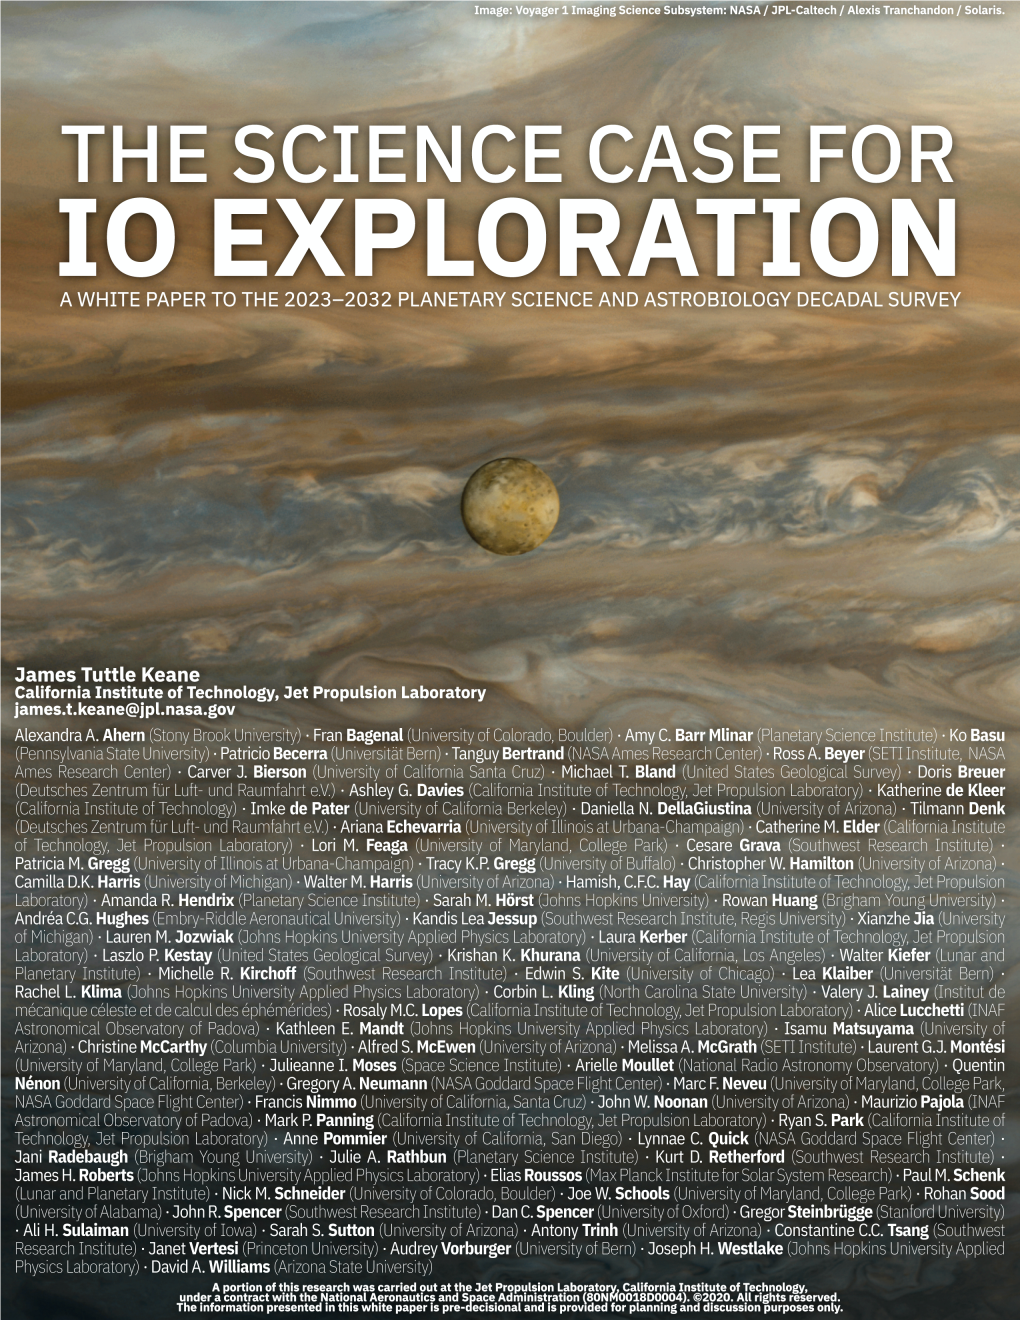 The Science Case for Io Exploration P.0/7